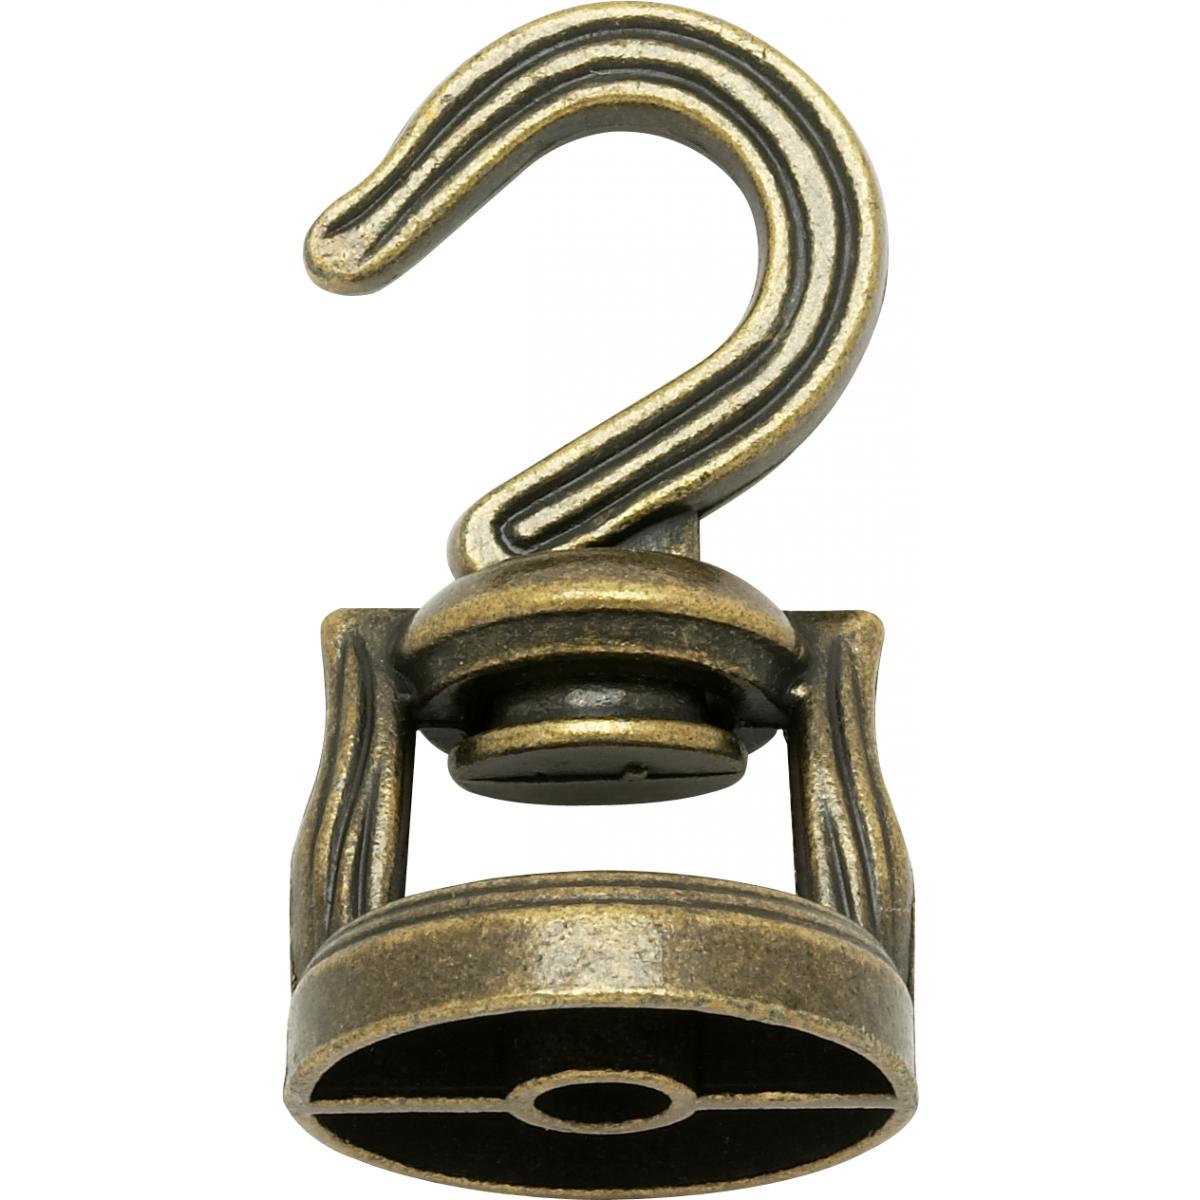 Satco 90-816 Die Cast Revolving Swivel Hooks Antique Brass Finish Kit Contains 1 Hook And Hardware